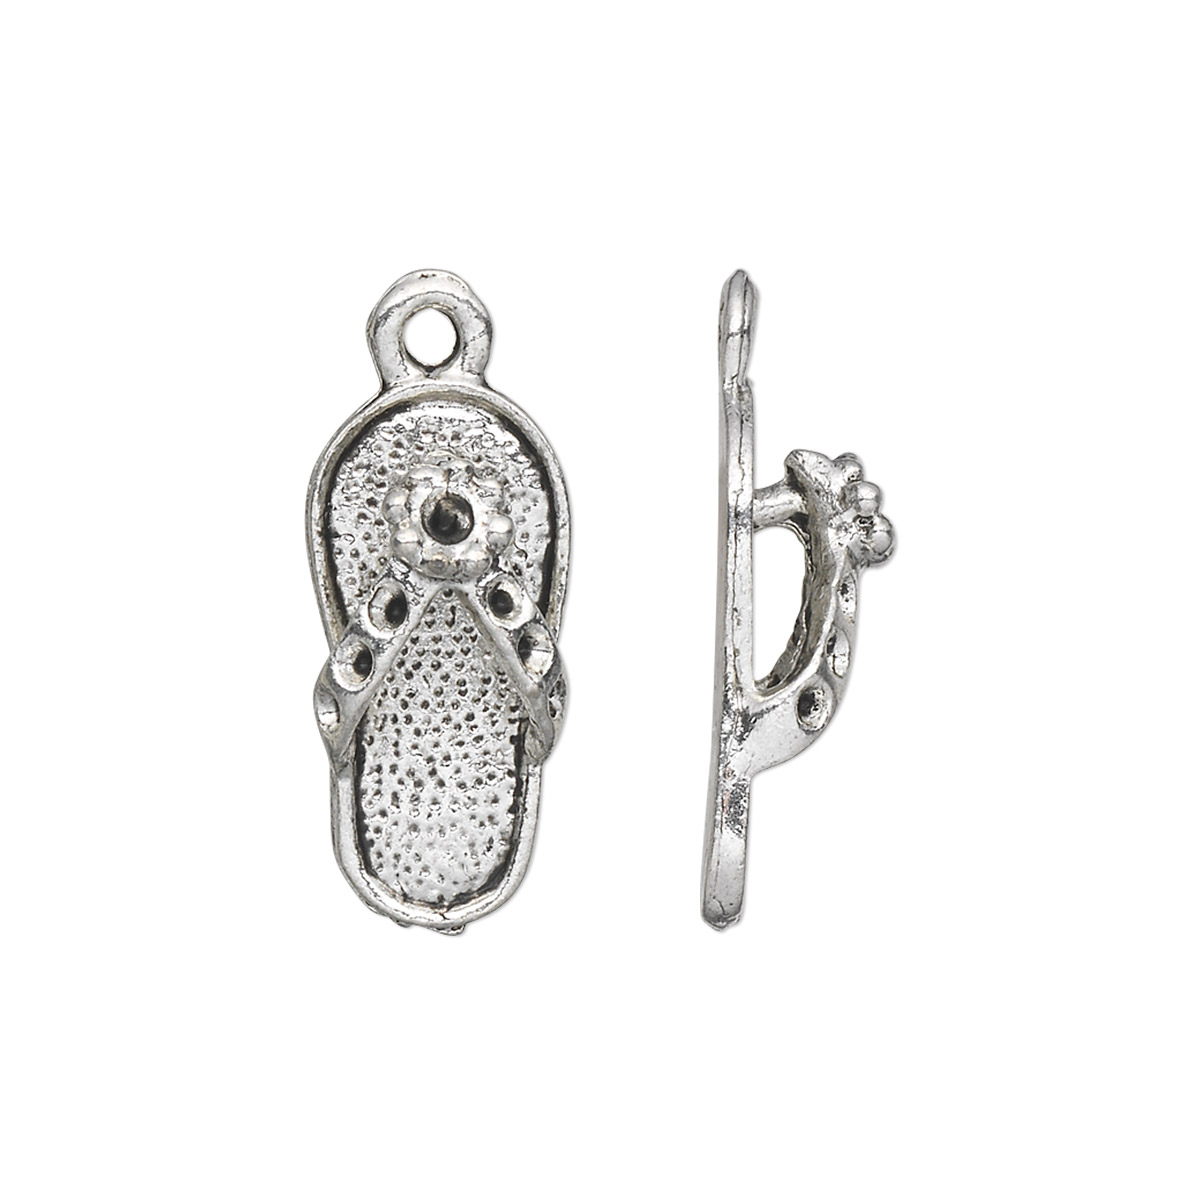 Charm, antique silver-plated 